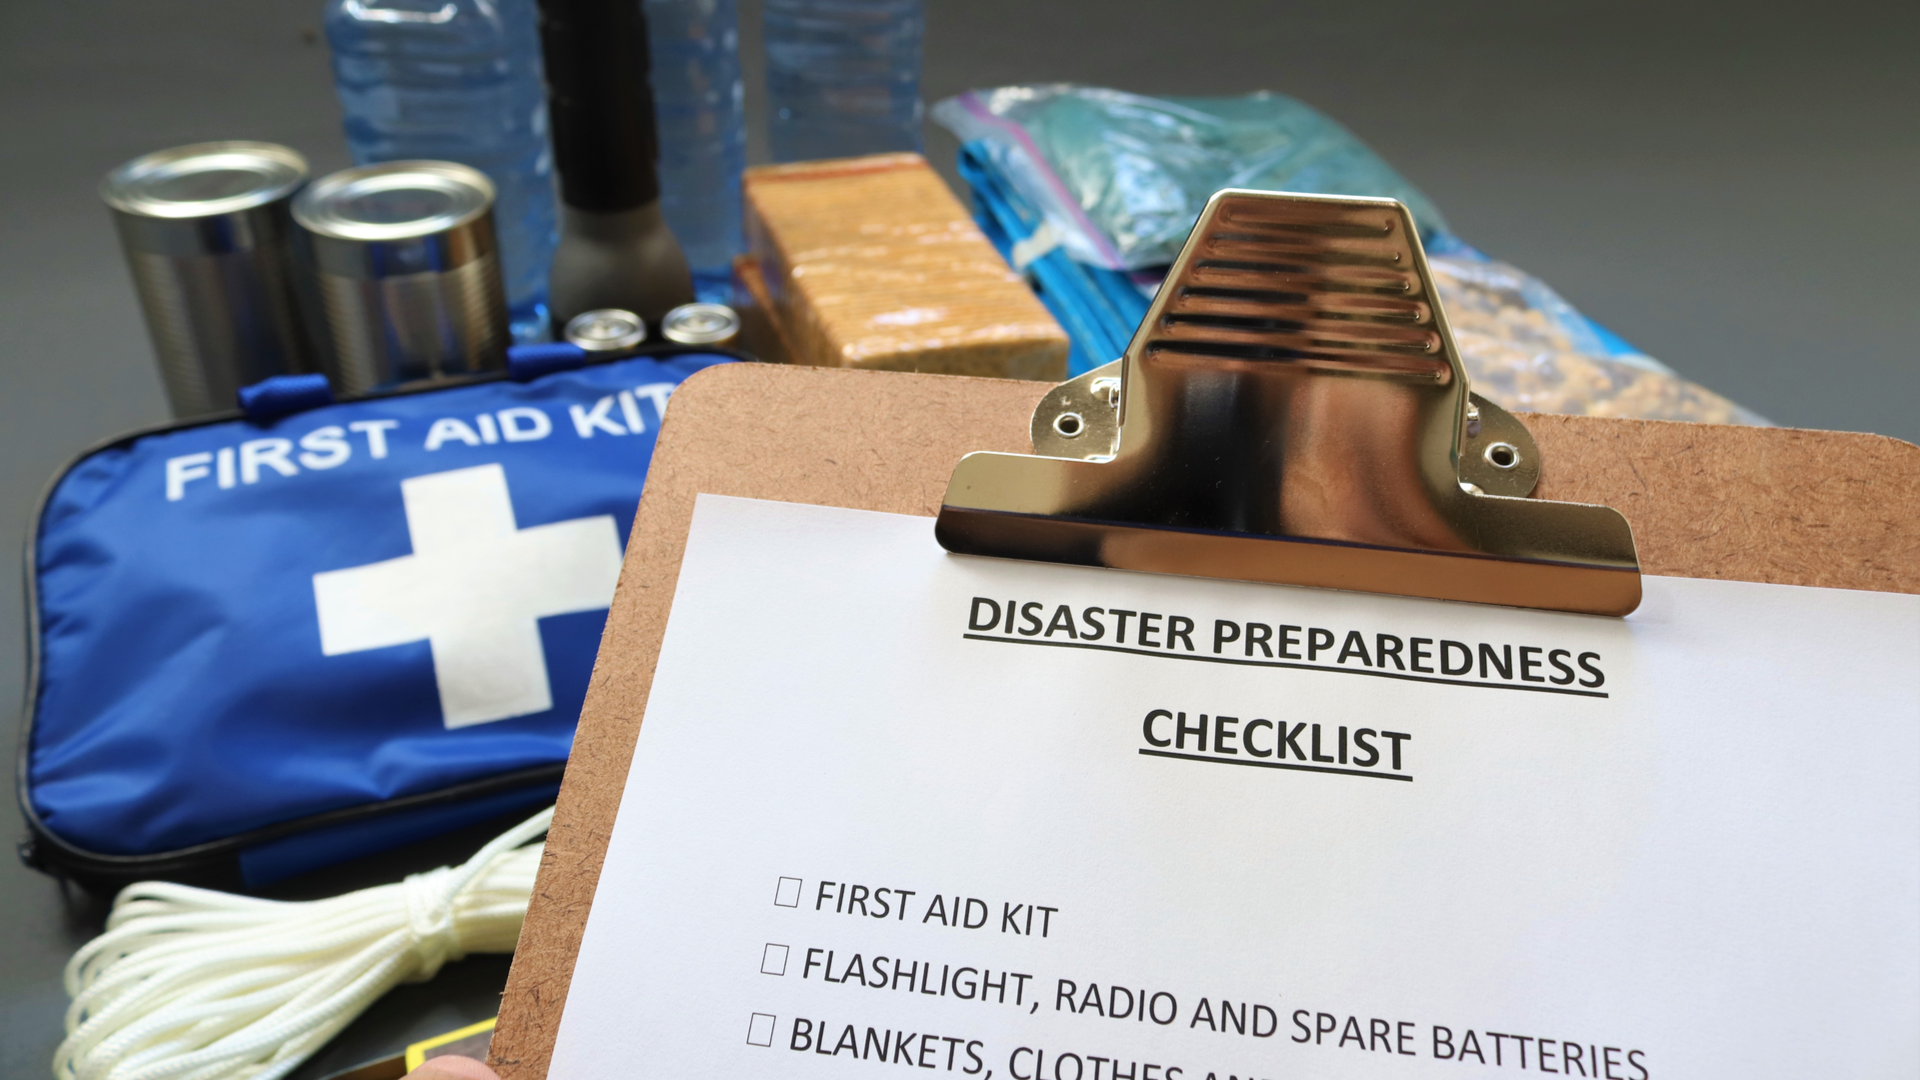 Disaster preparedness checklist on a clipboard with disaster relief items in the background.Such items would include a first aid kit, flashlight, tinned food, water, batteries and shelter.